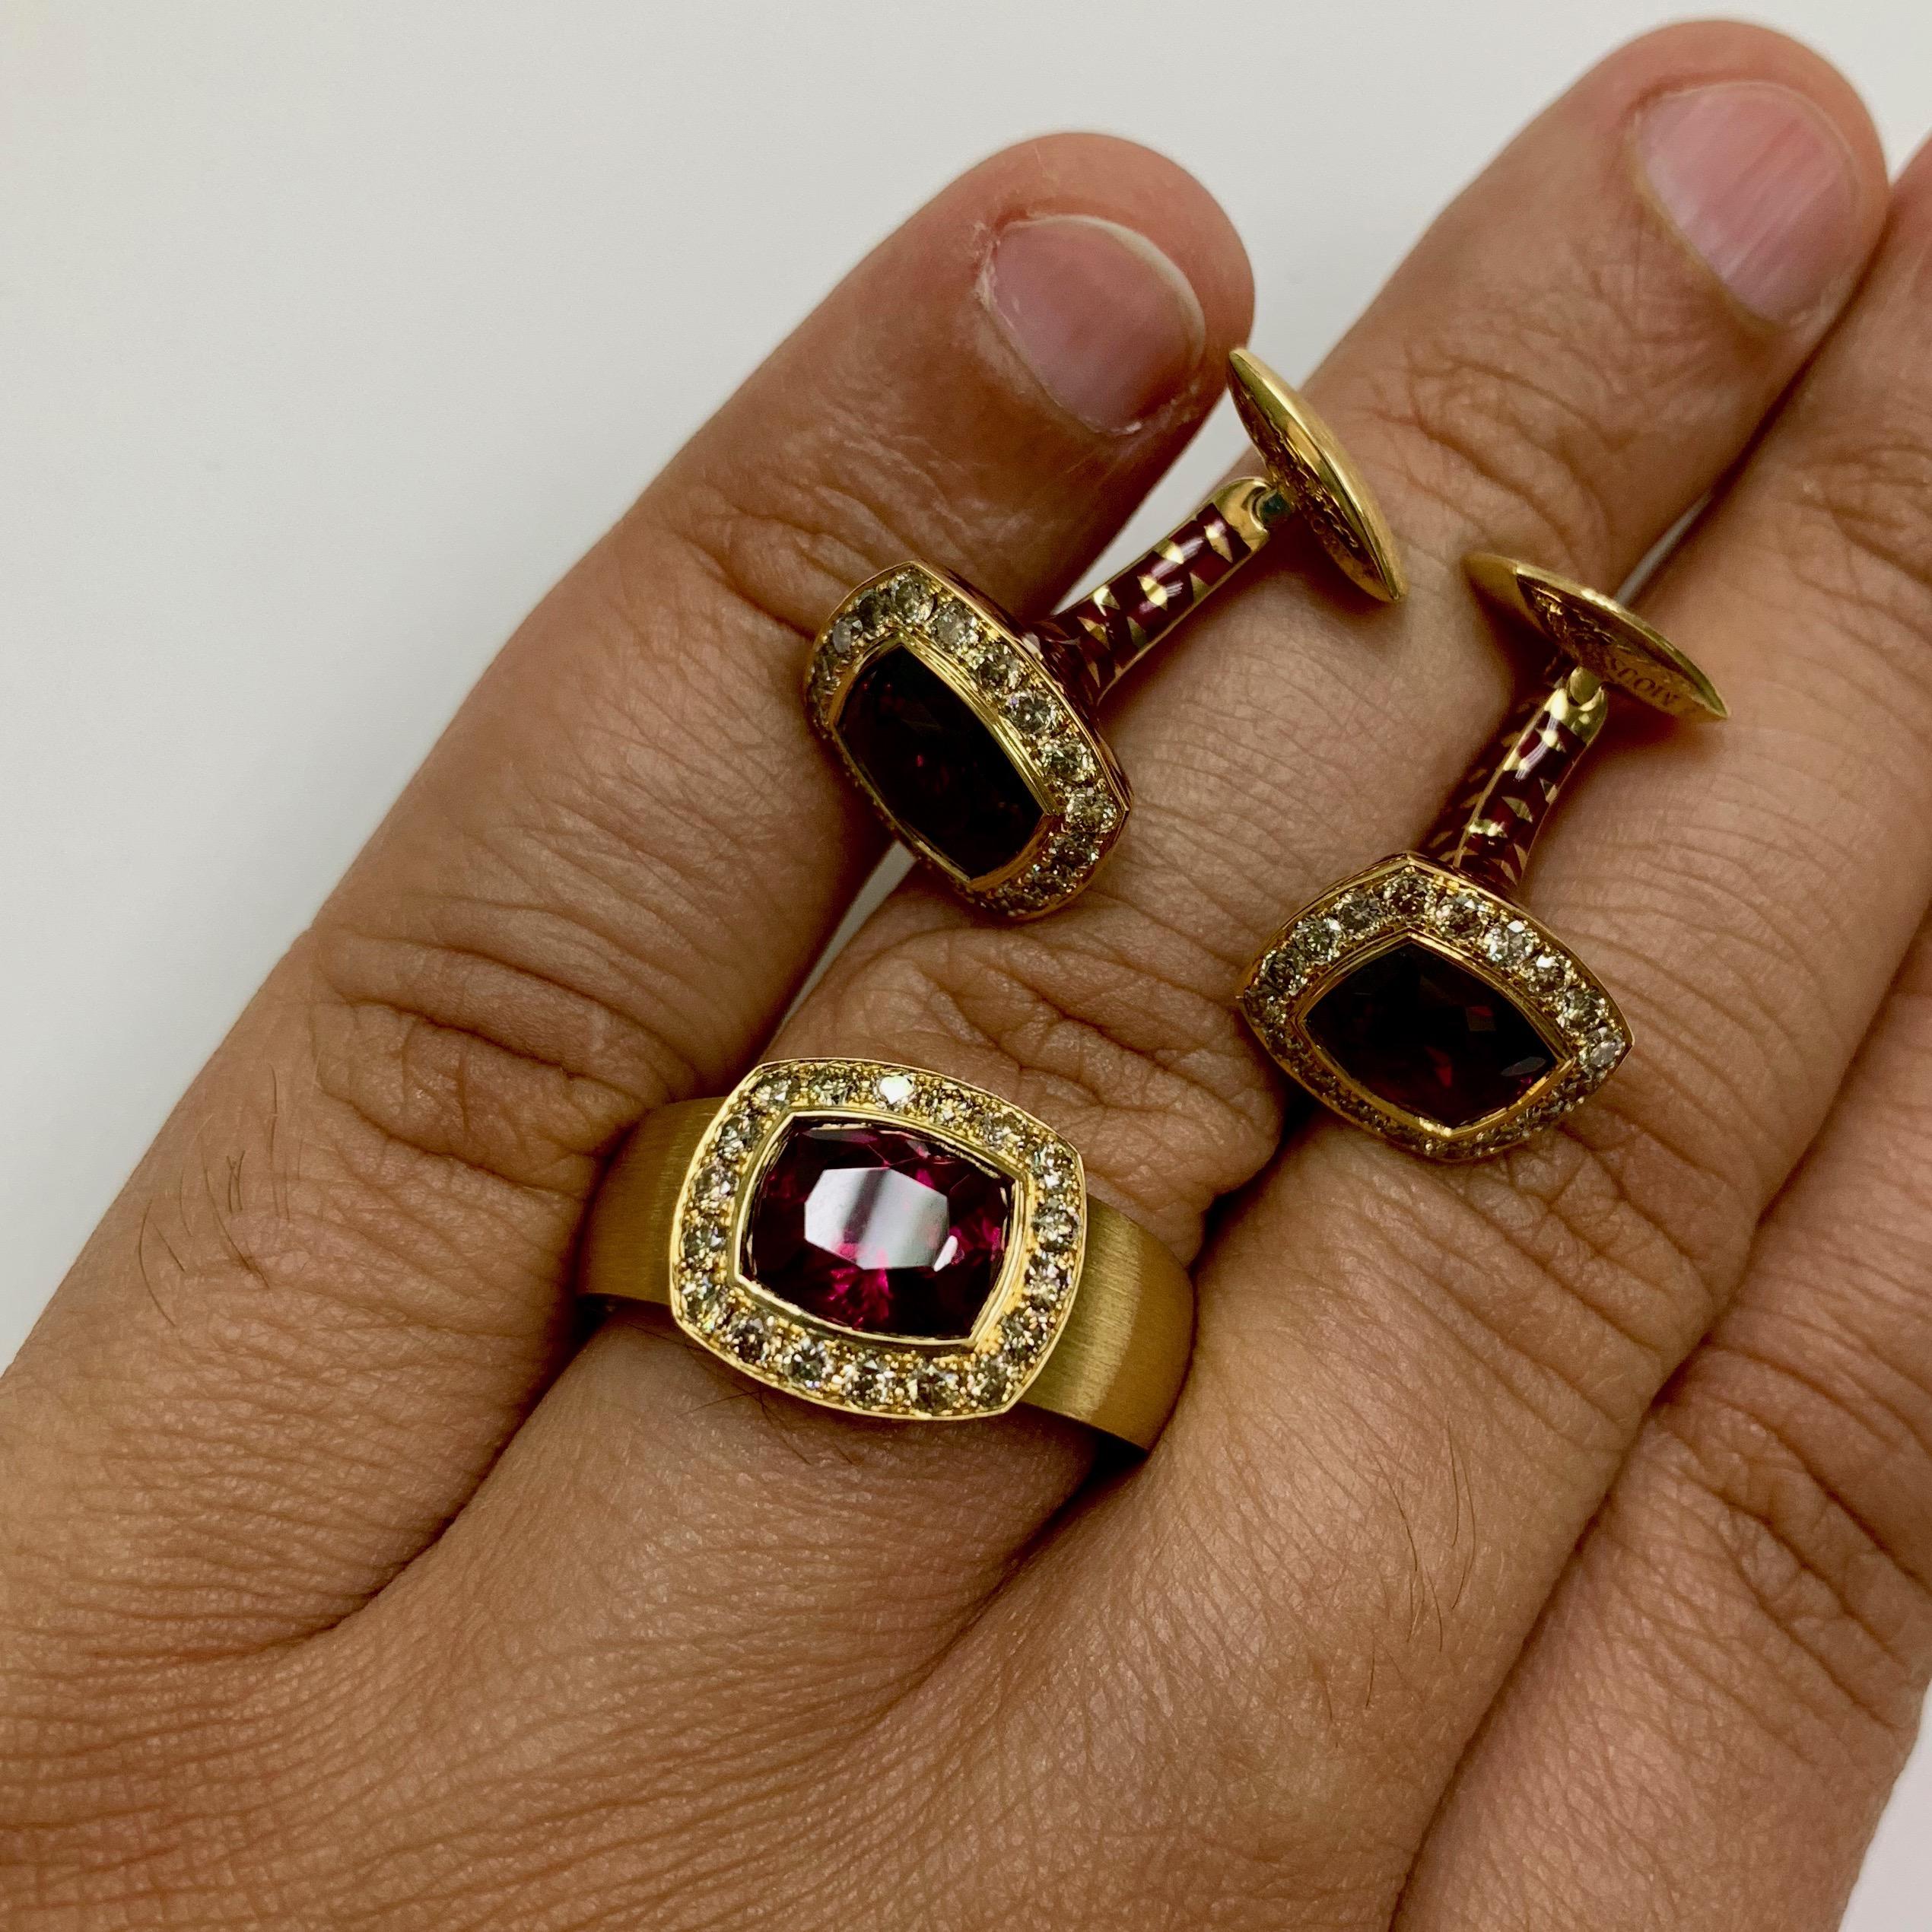 Garnet Diamonds 18 Karat Yellow Gold Male Enamel Ring and Cuffliks Suite
Our worldwide famous Kaleidoscope collection. Male version out now.
For Men who tired of boring ordinary things. Be different. Be brighter than others.
Can be ordered